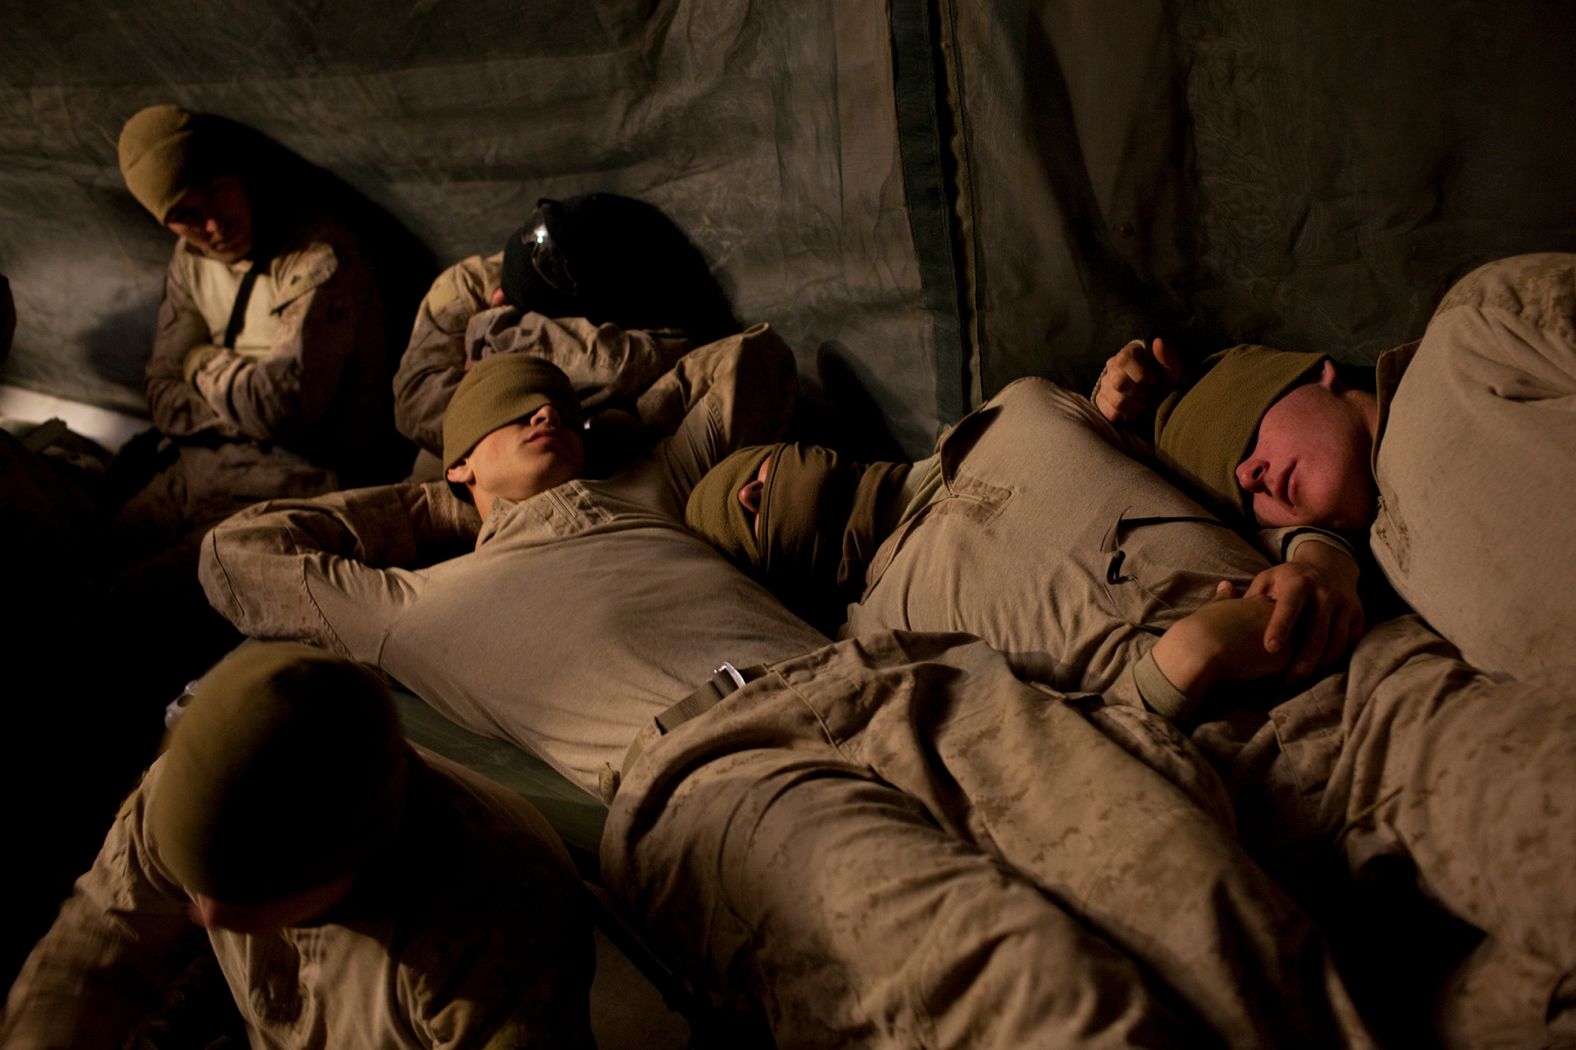 Troops rest at an airfield in Afghanistan's Helmand province in February 2010.